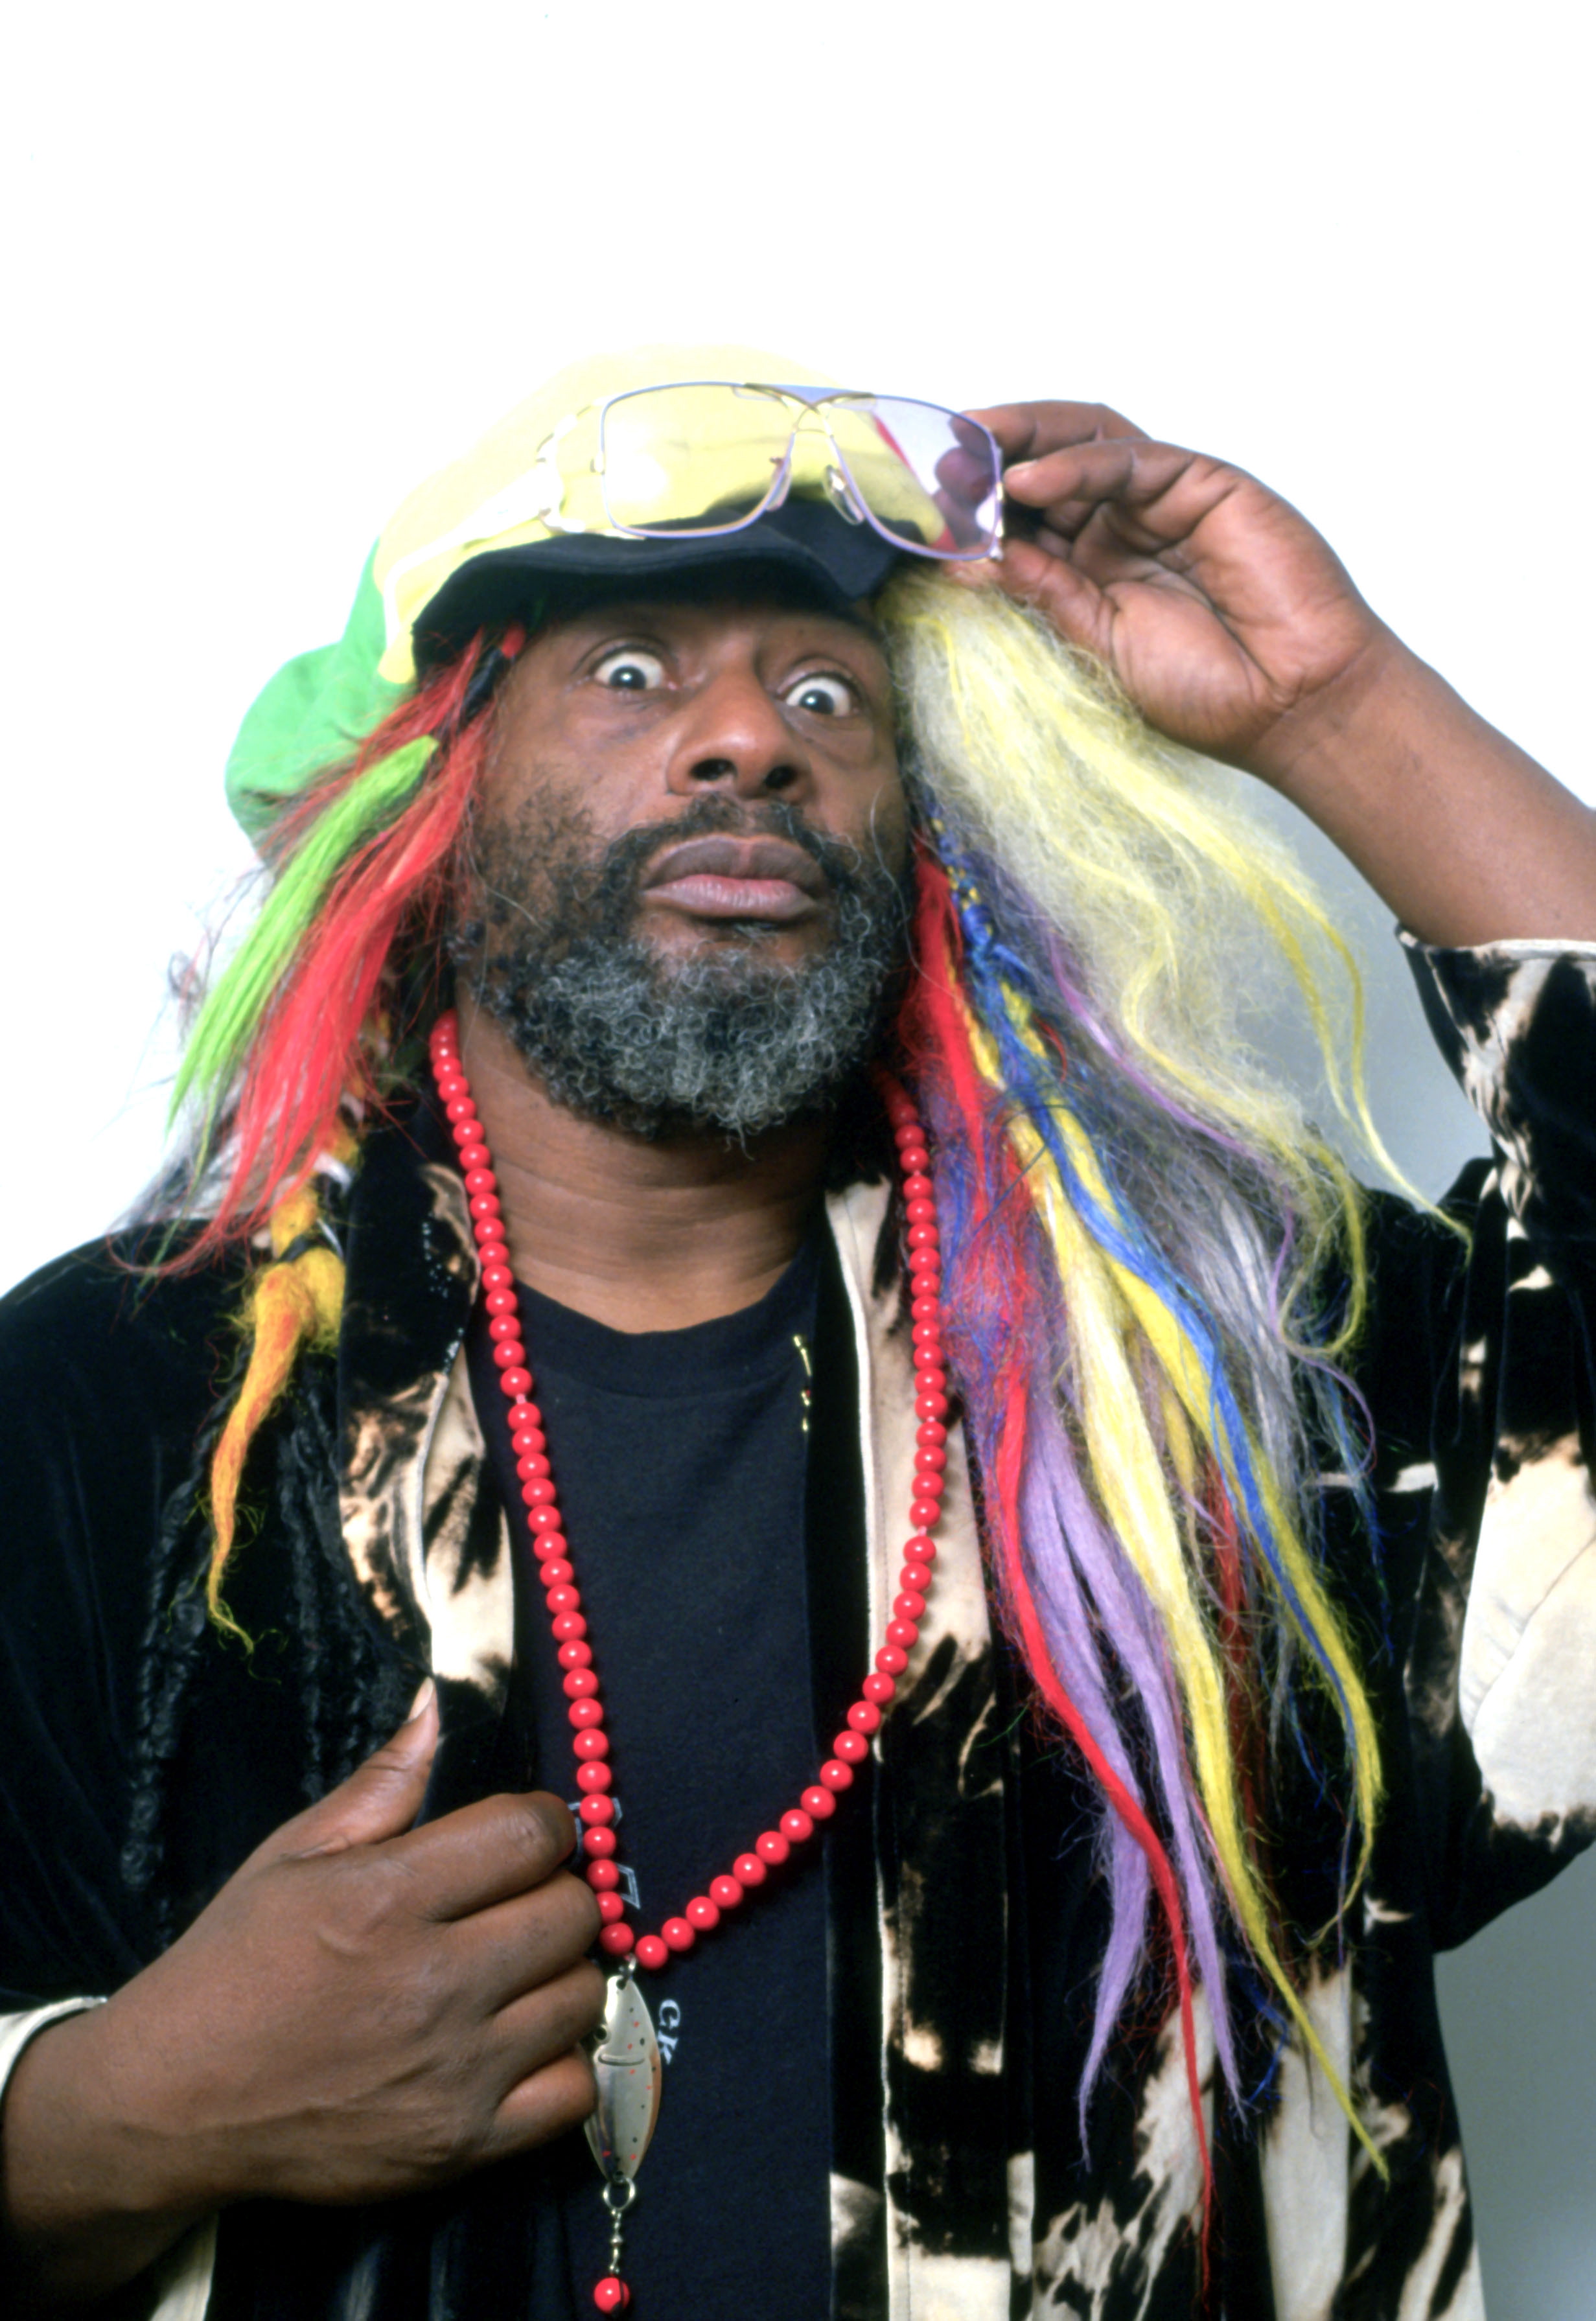 Parliament-Funkadelic: Our 1985 Interview With George Clinton